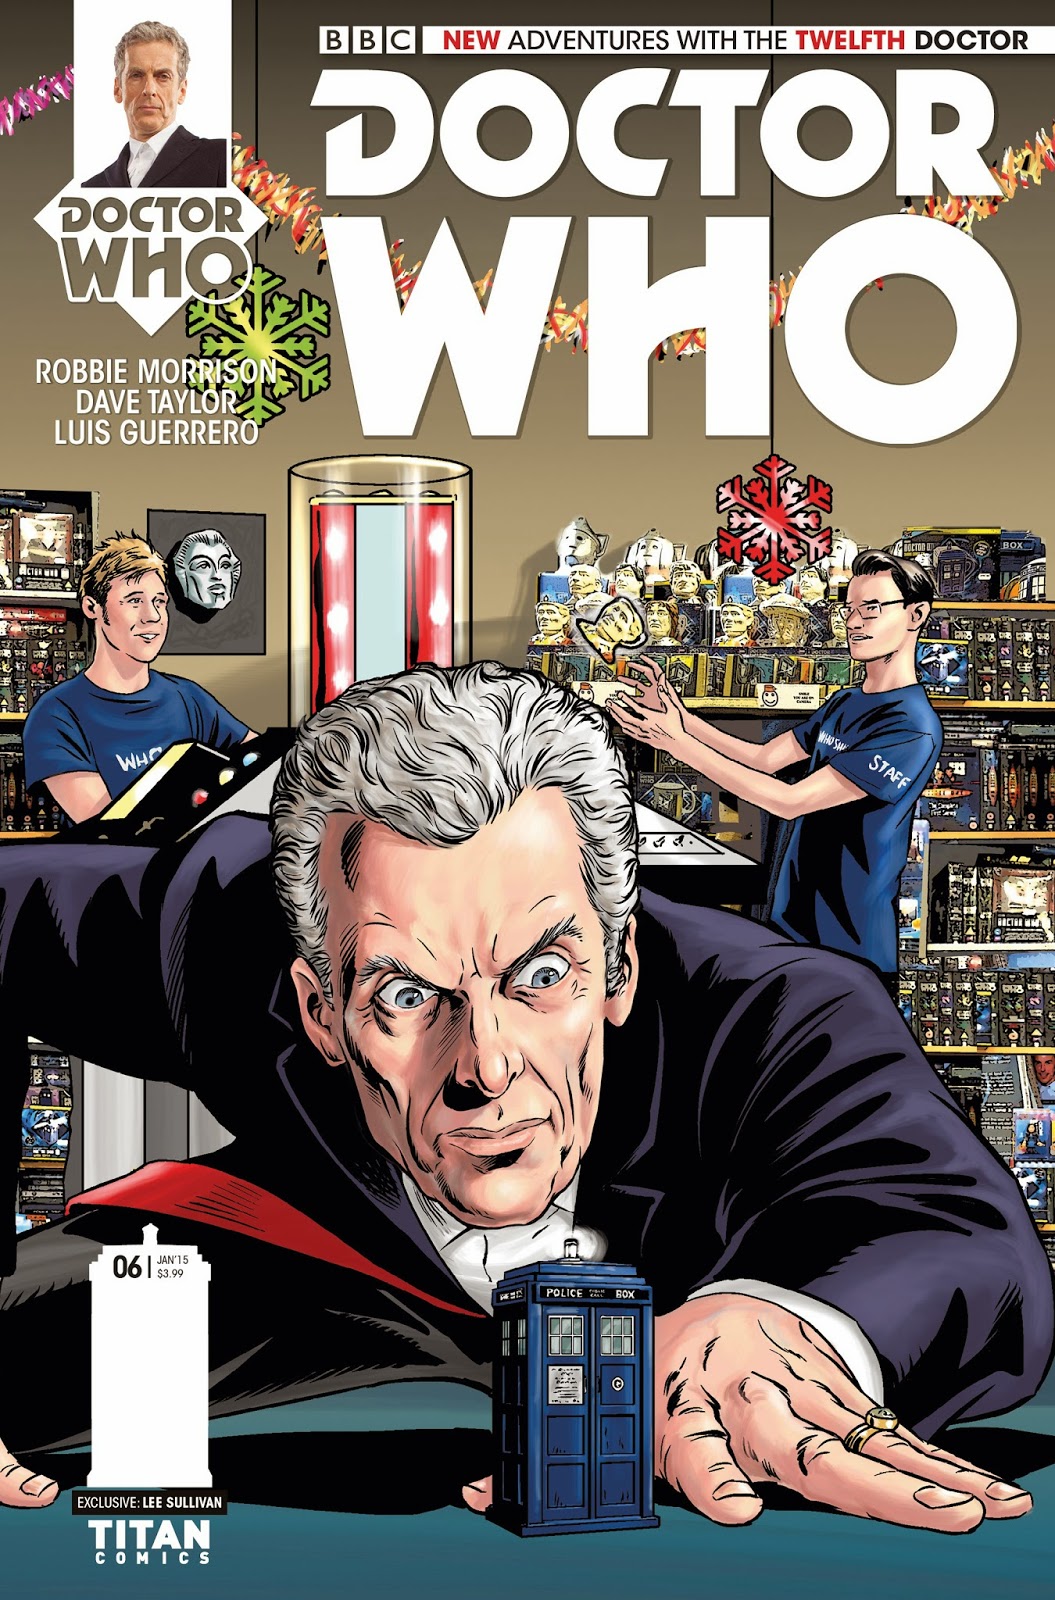 DOCTOR WHO #1 twelth 12th PETER CAPALDI photo cover variant TITAN 2014 BBC SDCC 